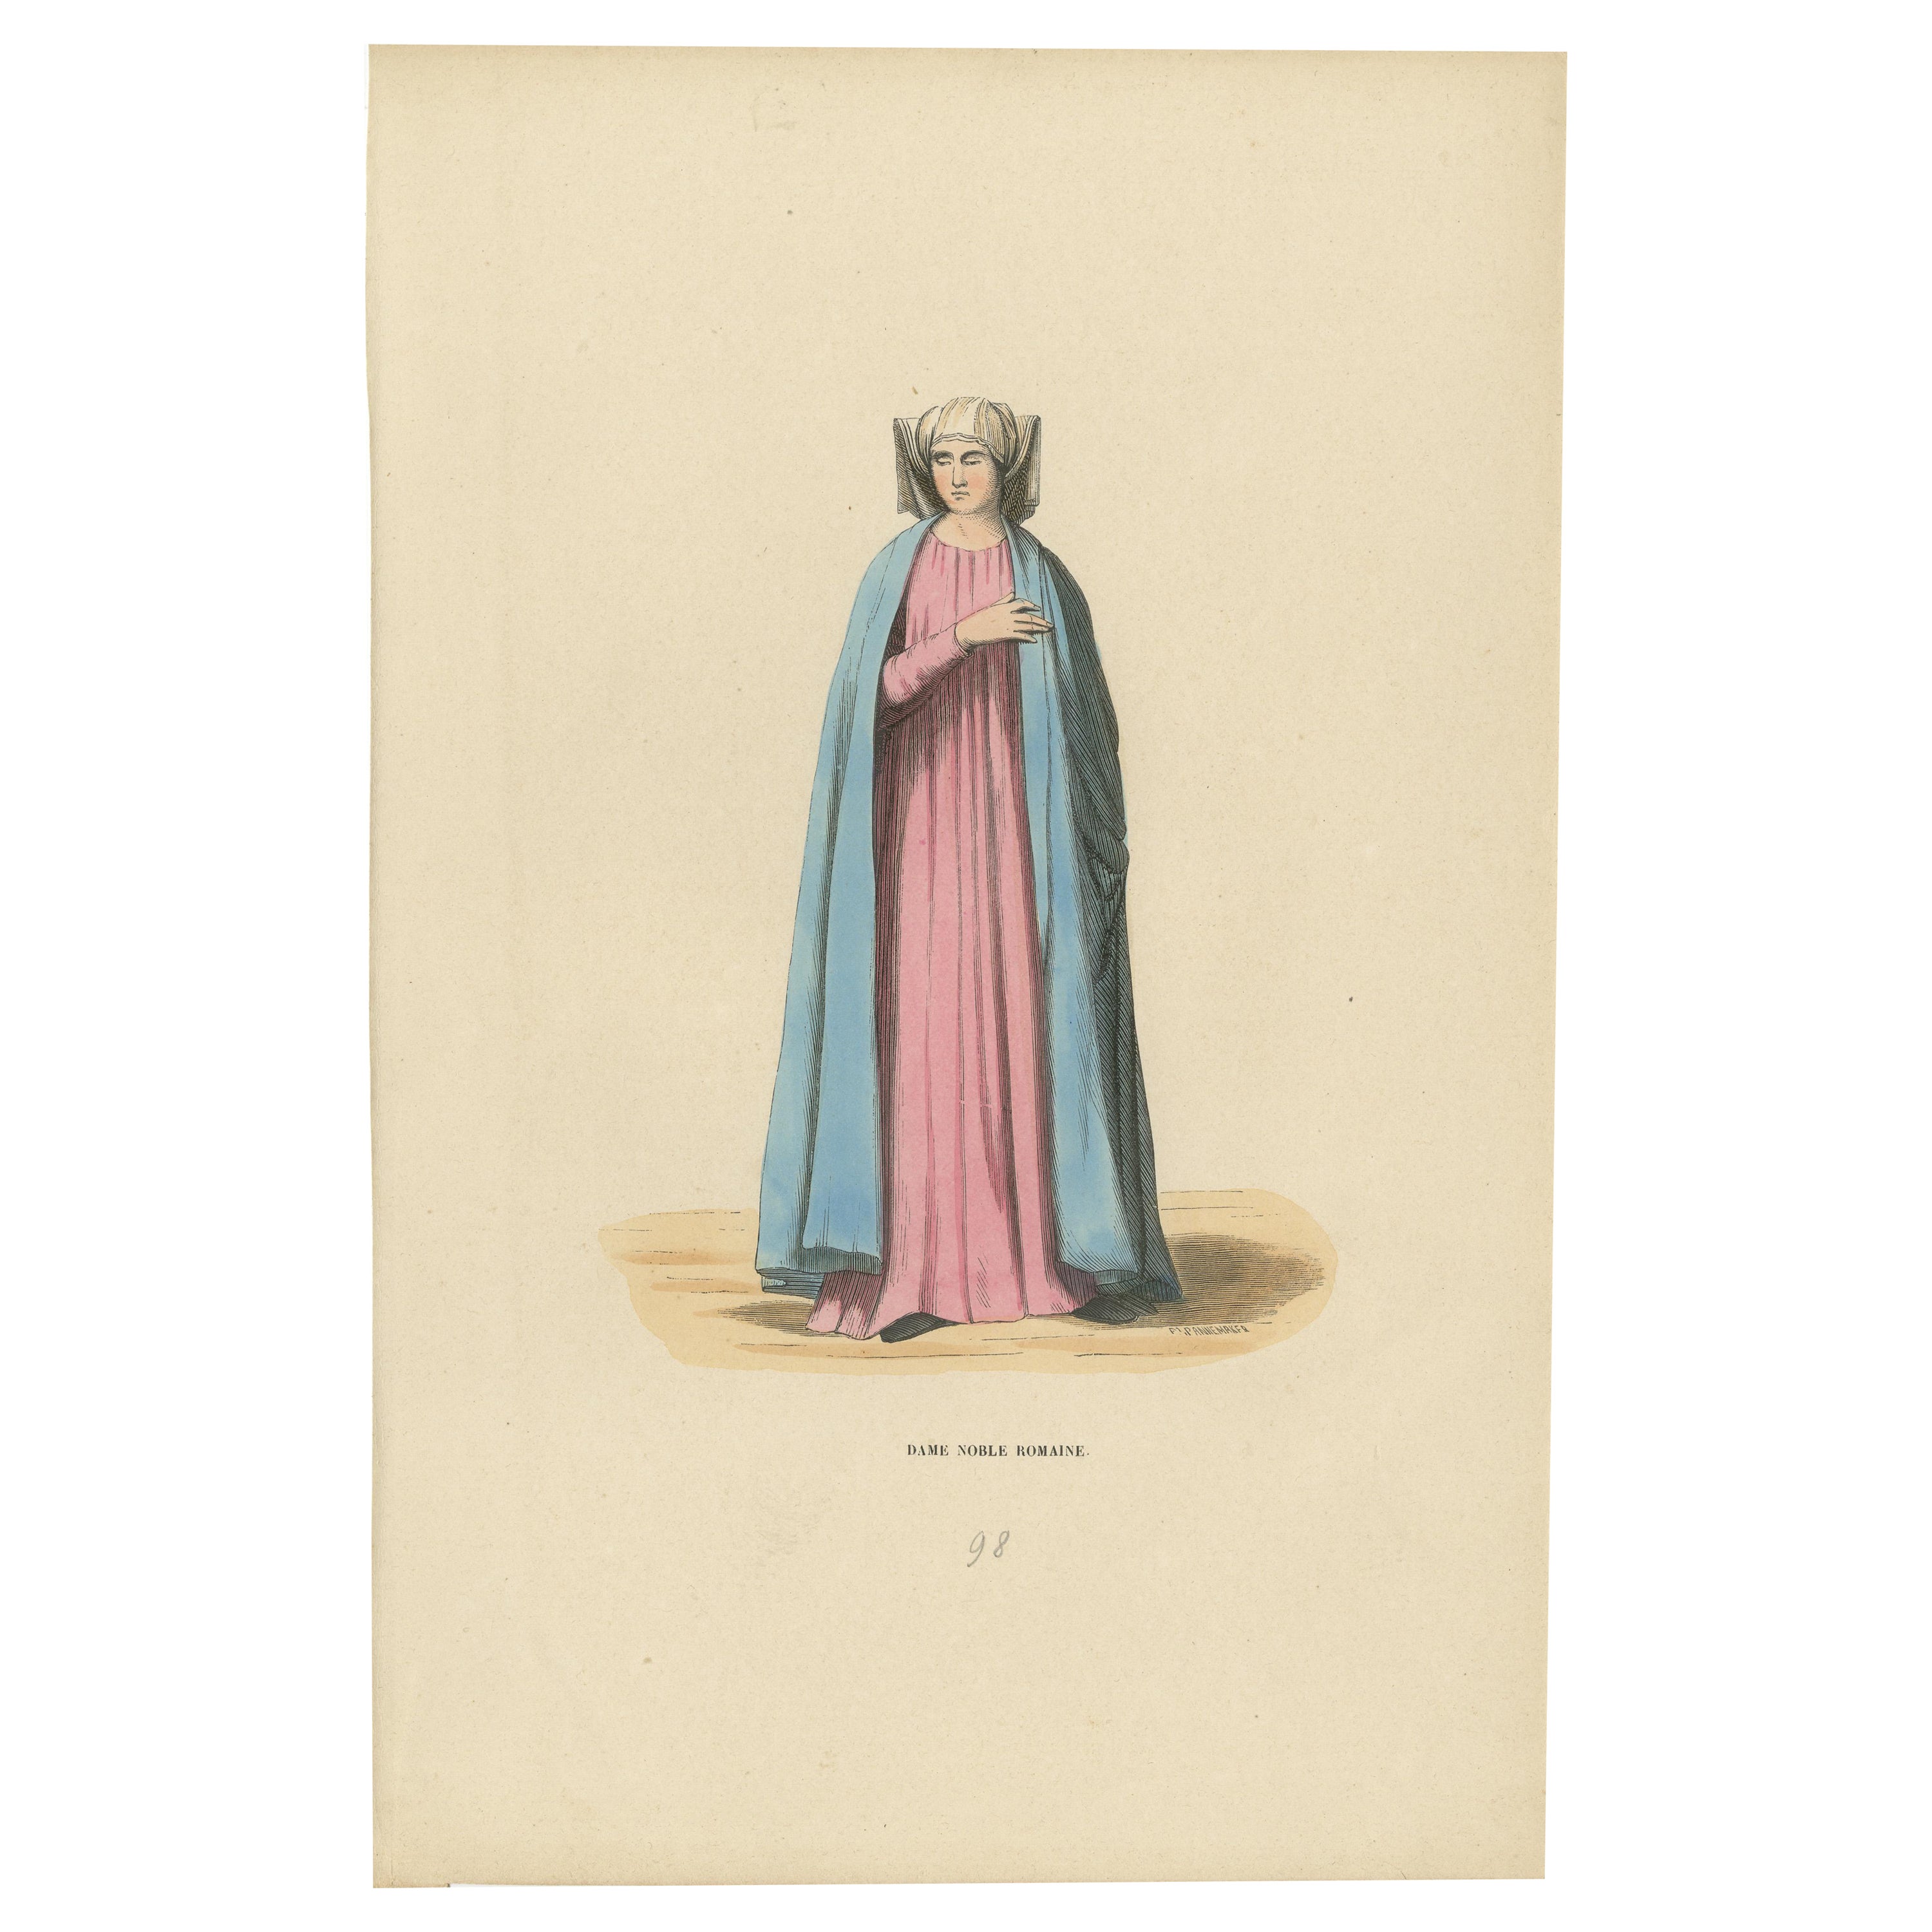 Noble Roman Lady of the Middle Ages, Handcolored and Published in 1847